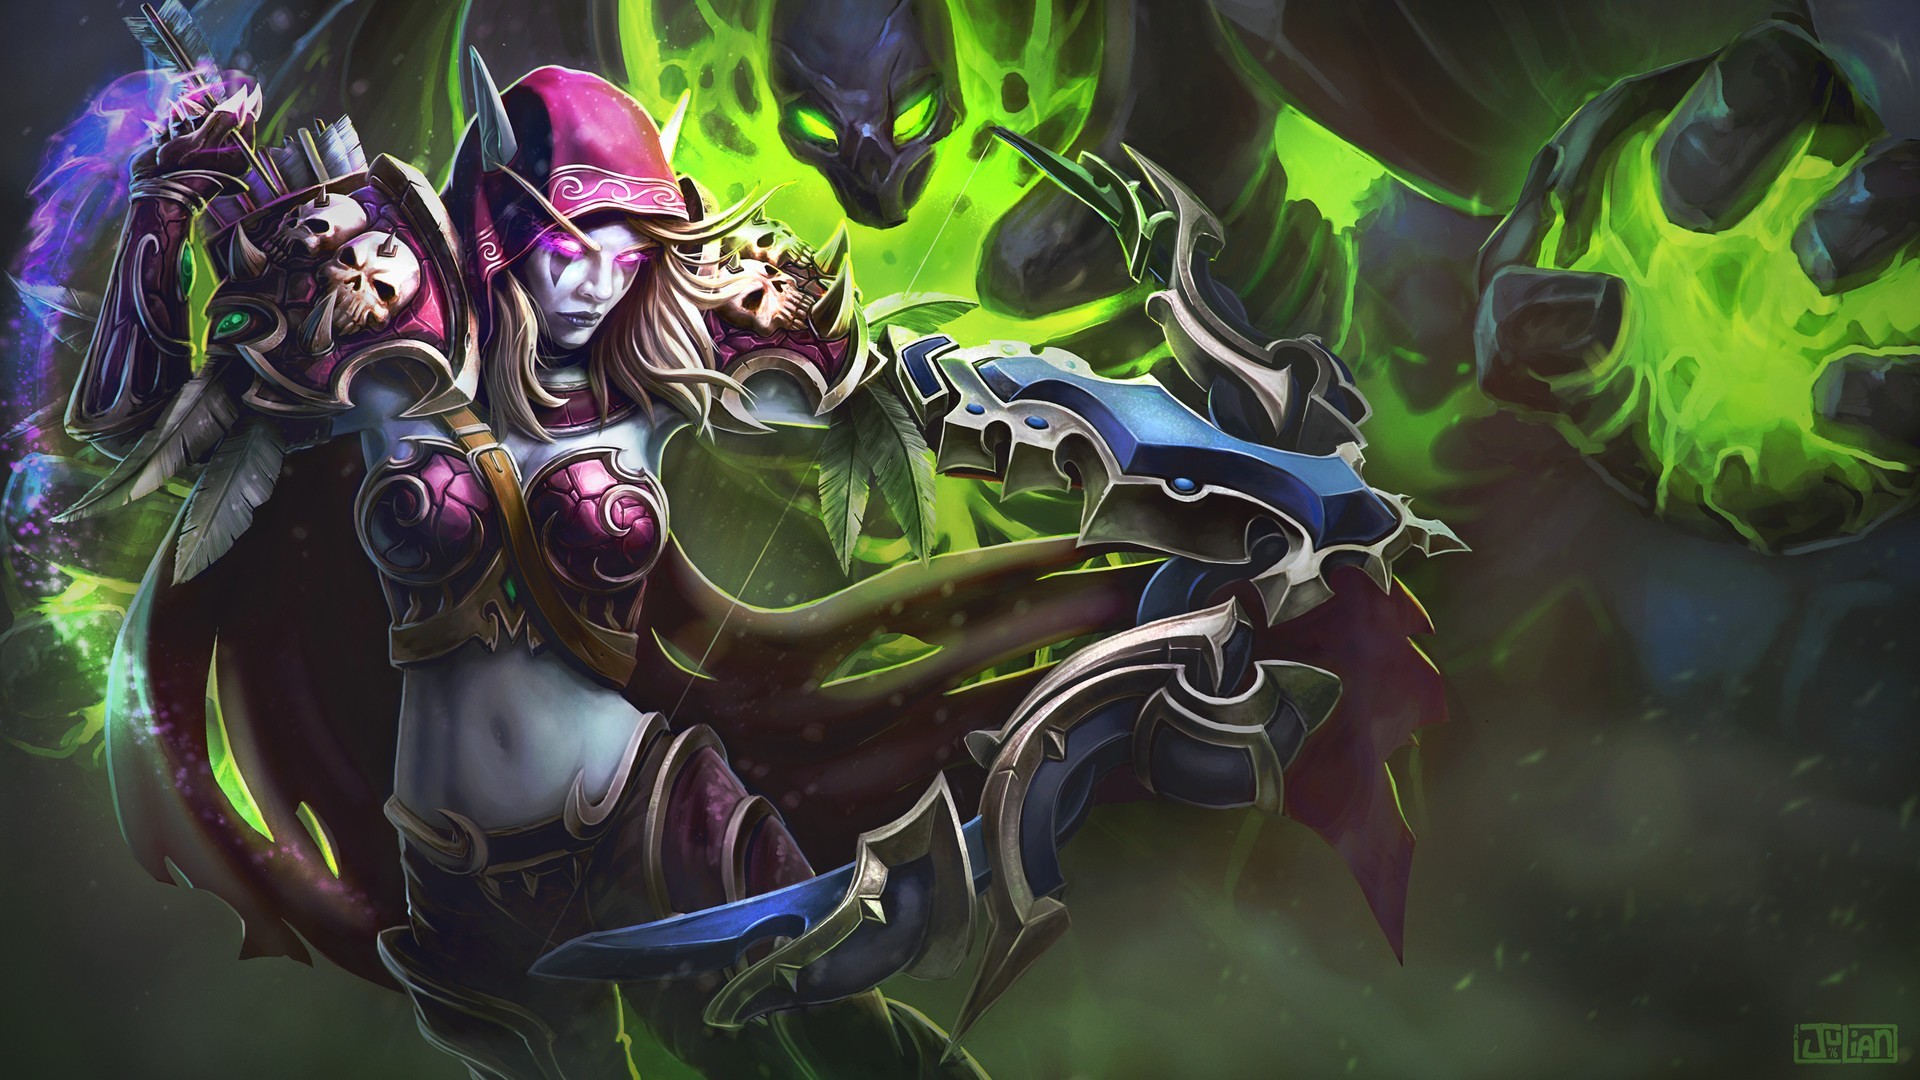 Sylvanas Windrunner, World of Warcraft, Video games, Bow, Arrows, Fantasy girl Wallpapers HD / Desktop and Mobile Backgrounds